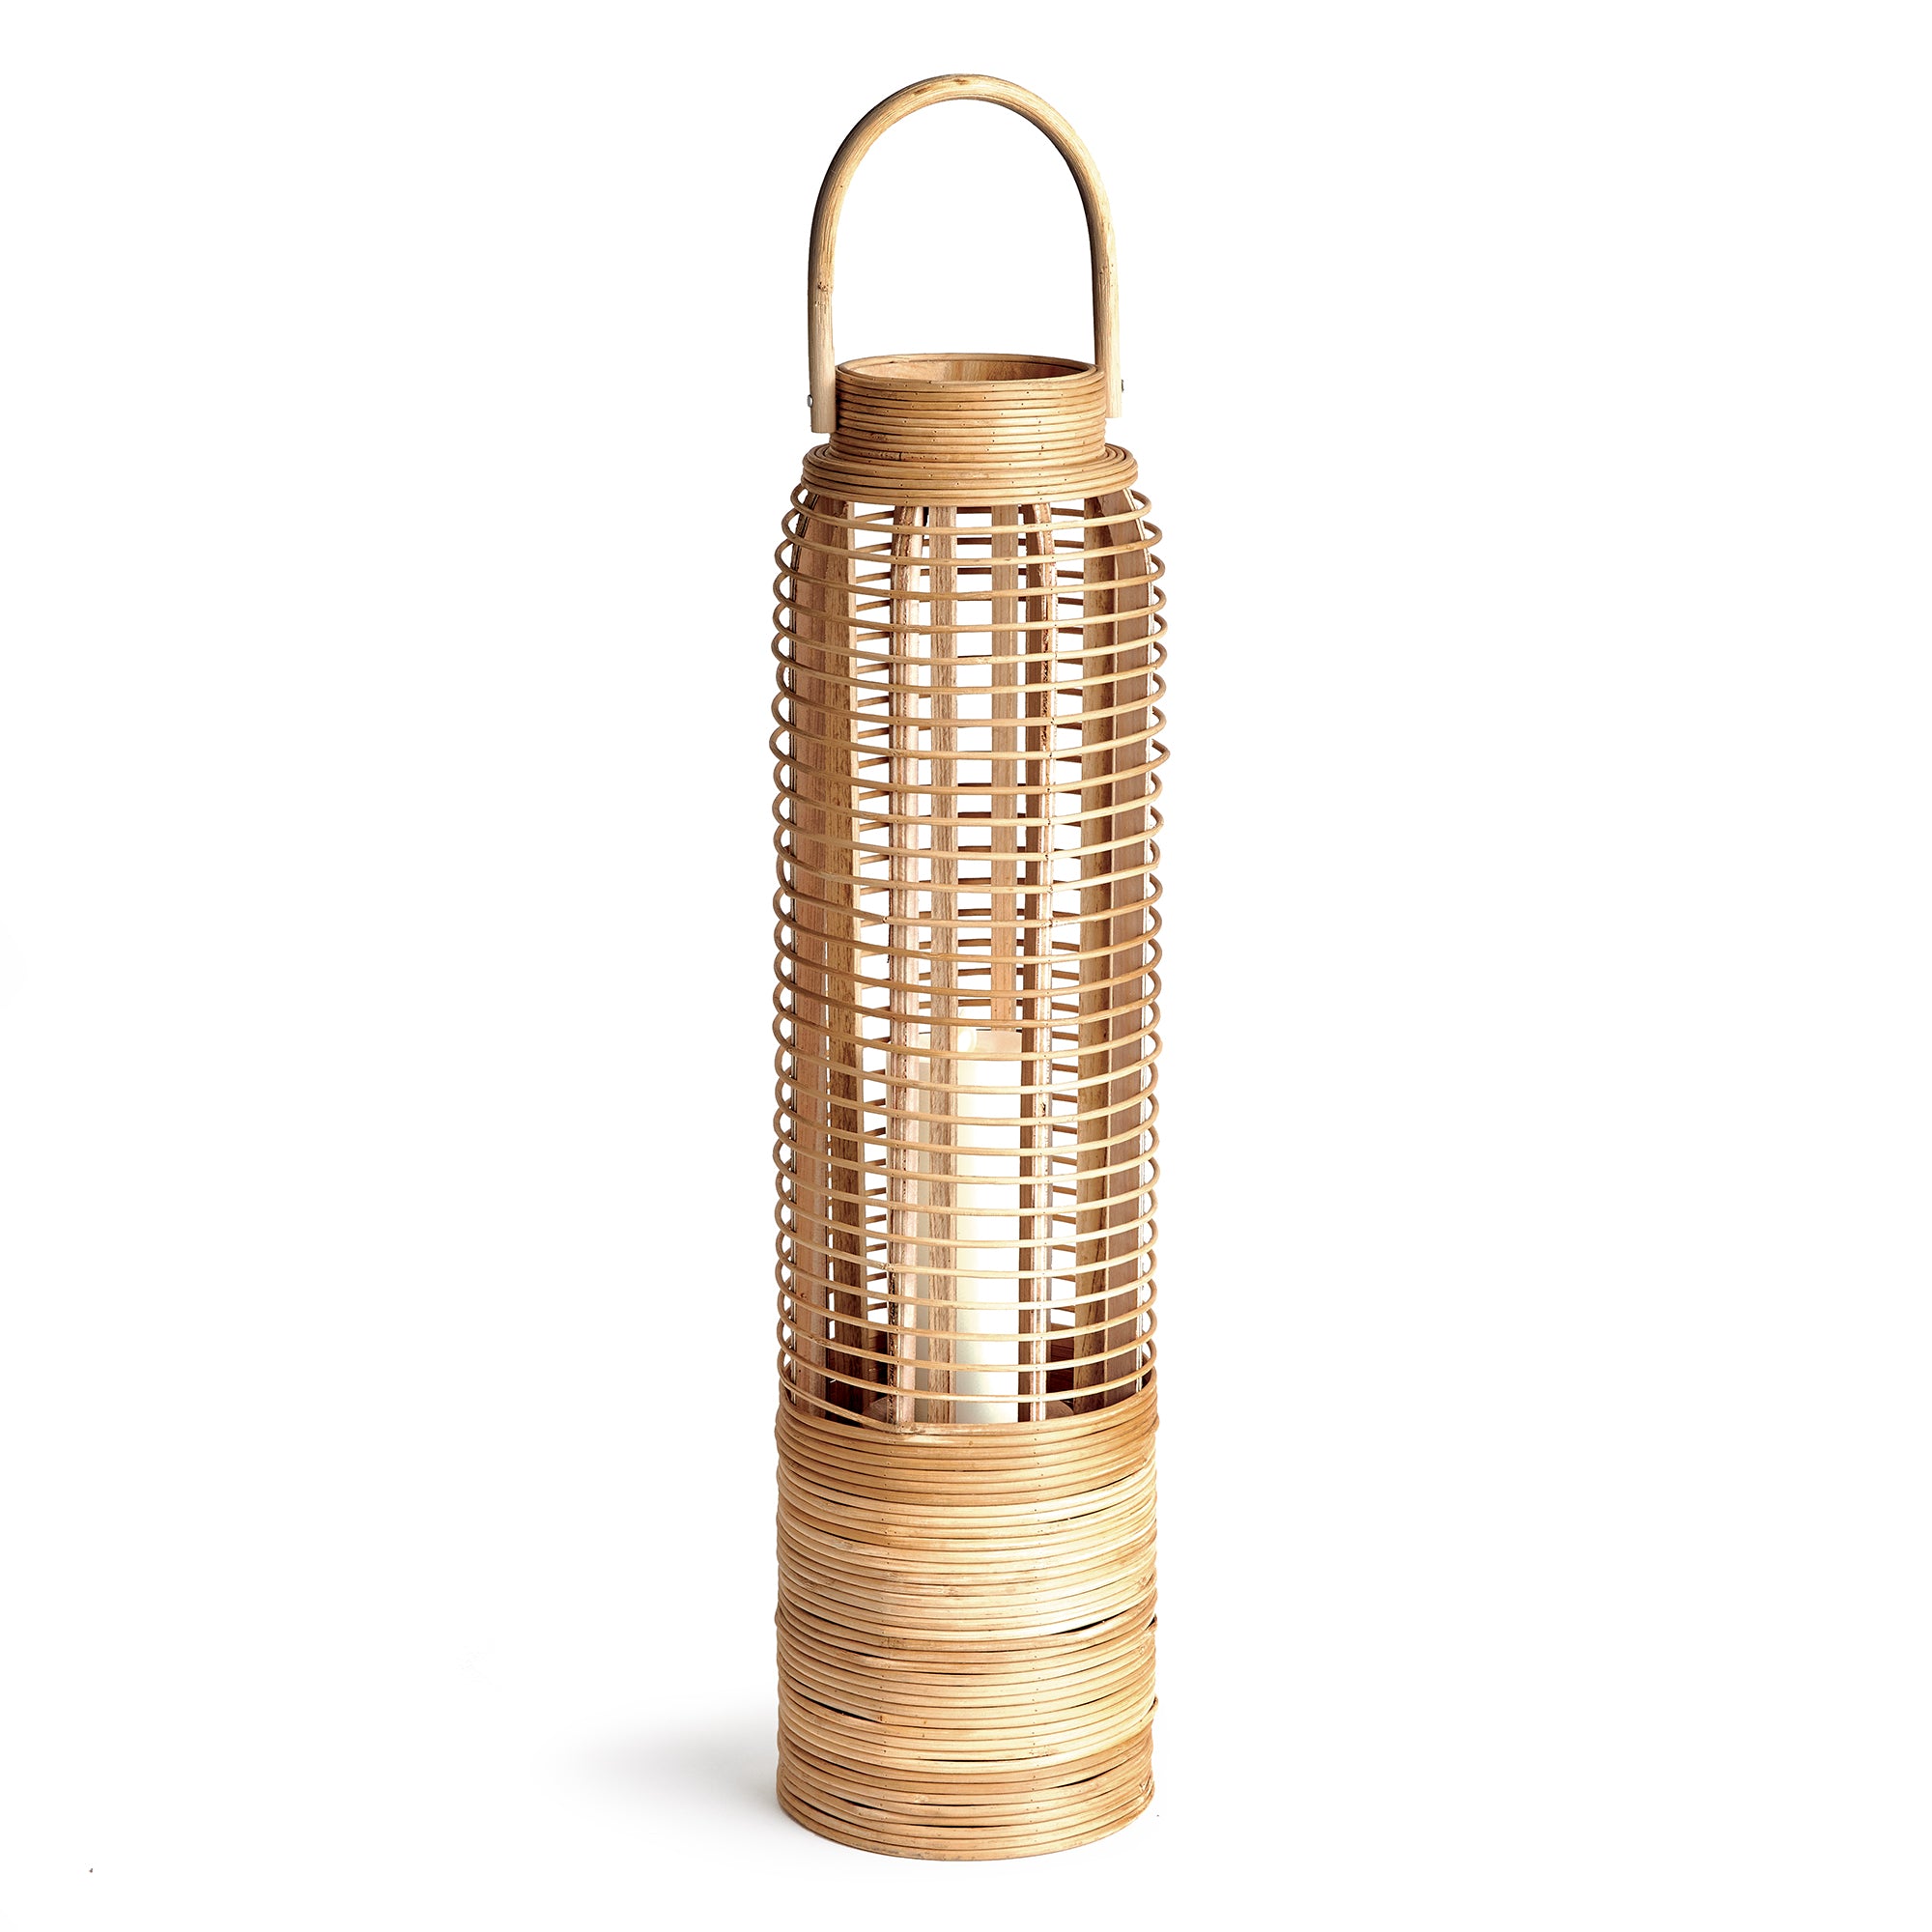 With a tall and slender rattan body, this large scale lantern really makes a statement. At home in the coastal setting or anywhere needing a touch of nature. Amethyst Home provides interior design, new construction, custom furniture, and area rugs in the Winter Garden metro area.